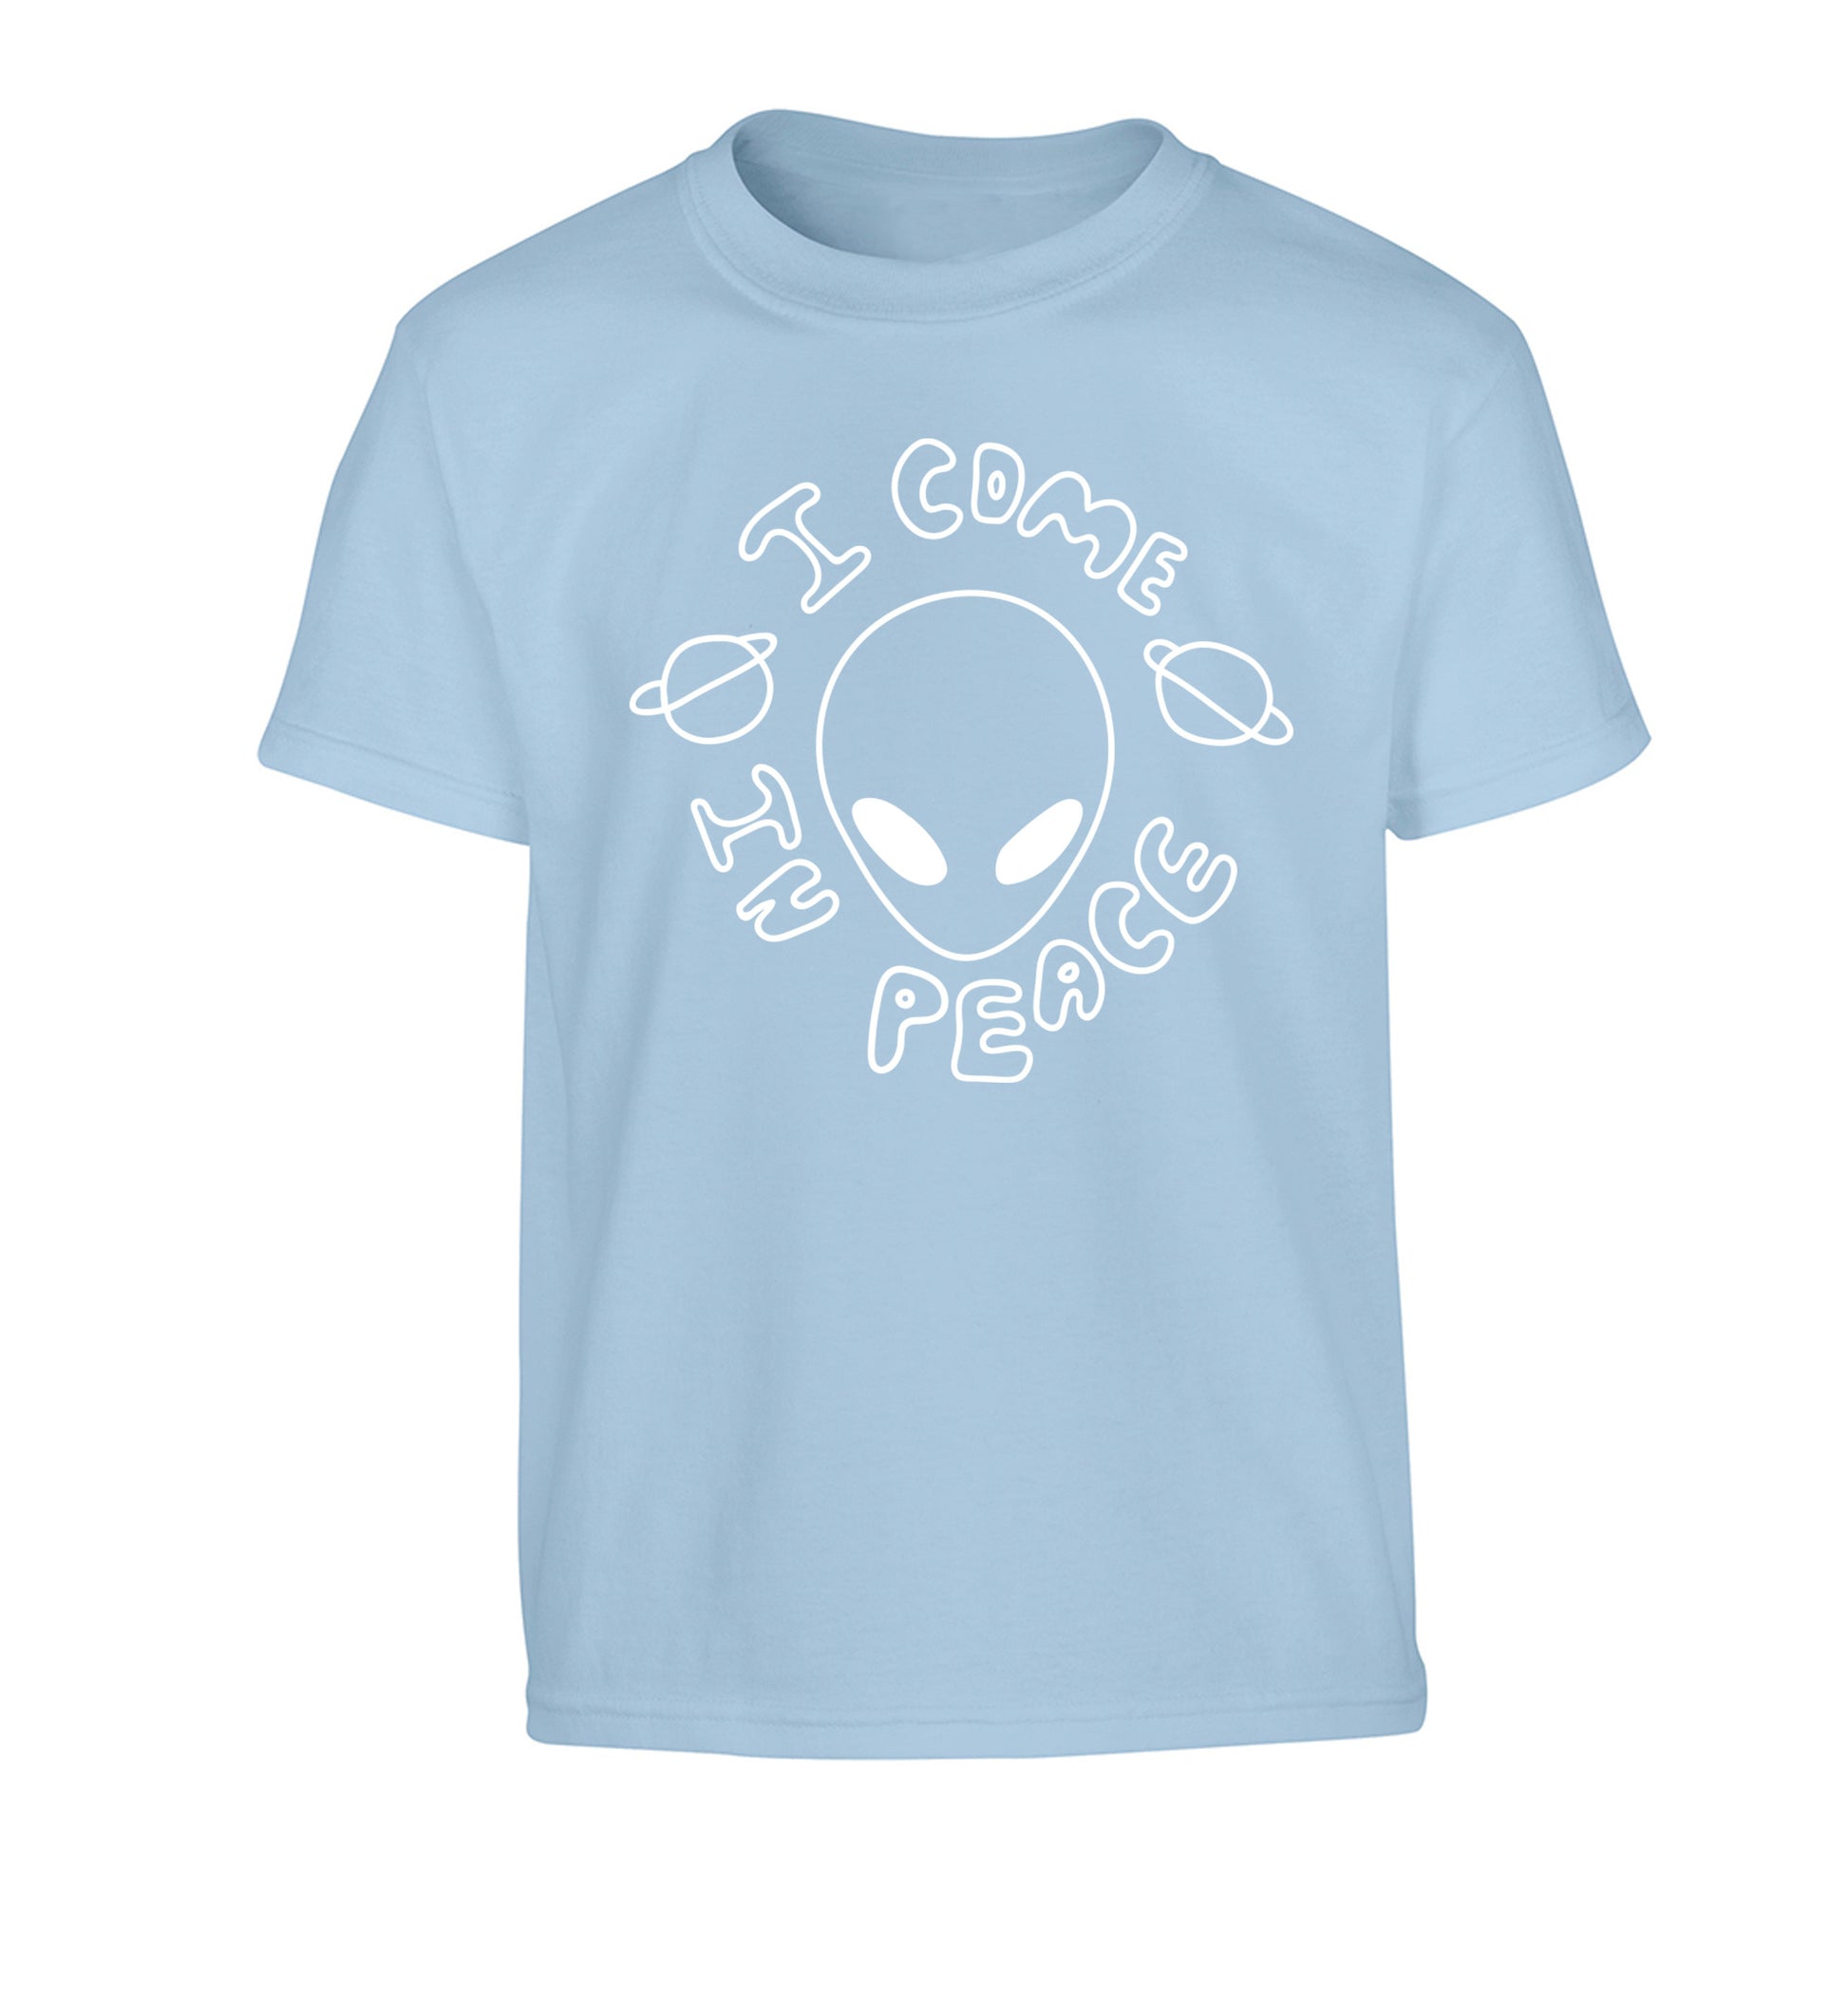 I come in peace Children's light blue Tshirt 12-14 Years